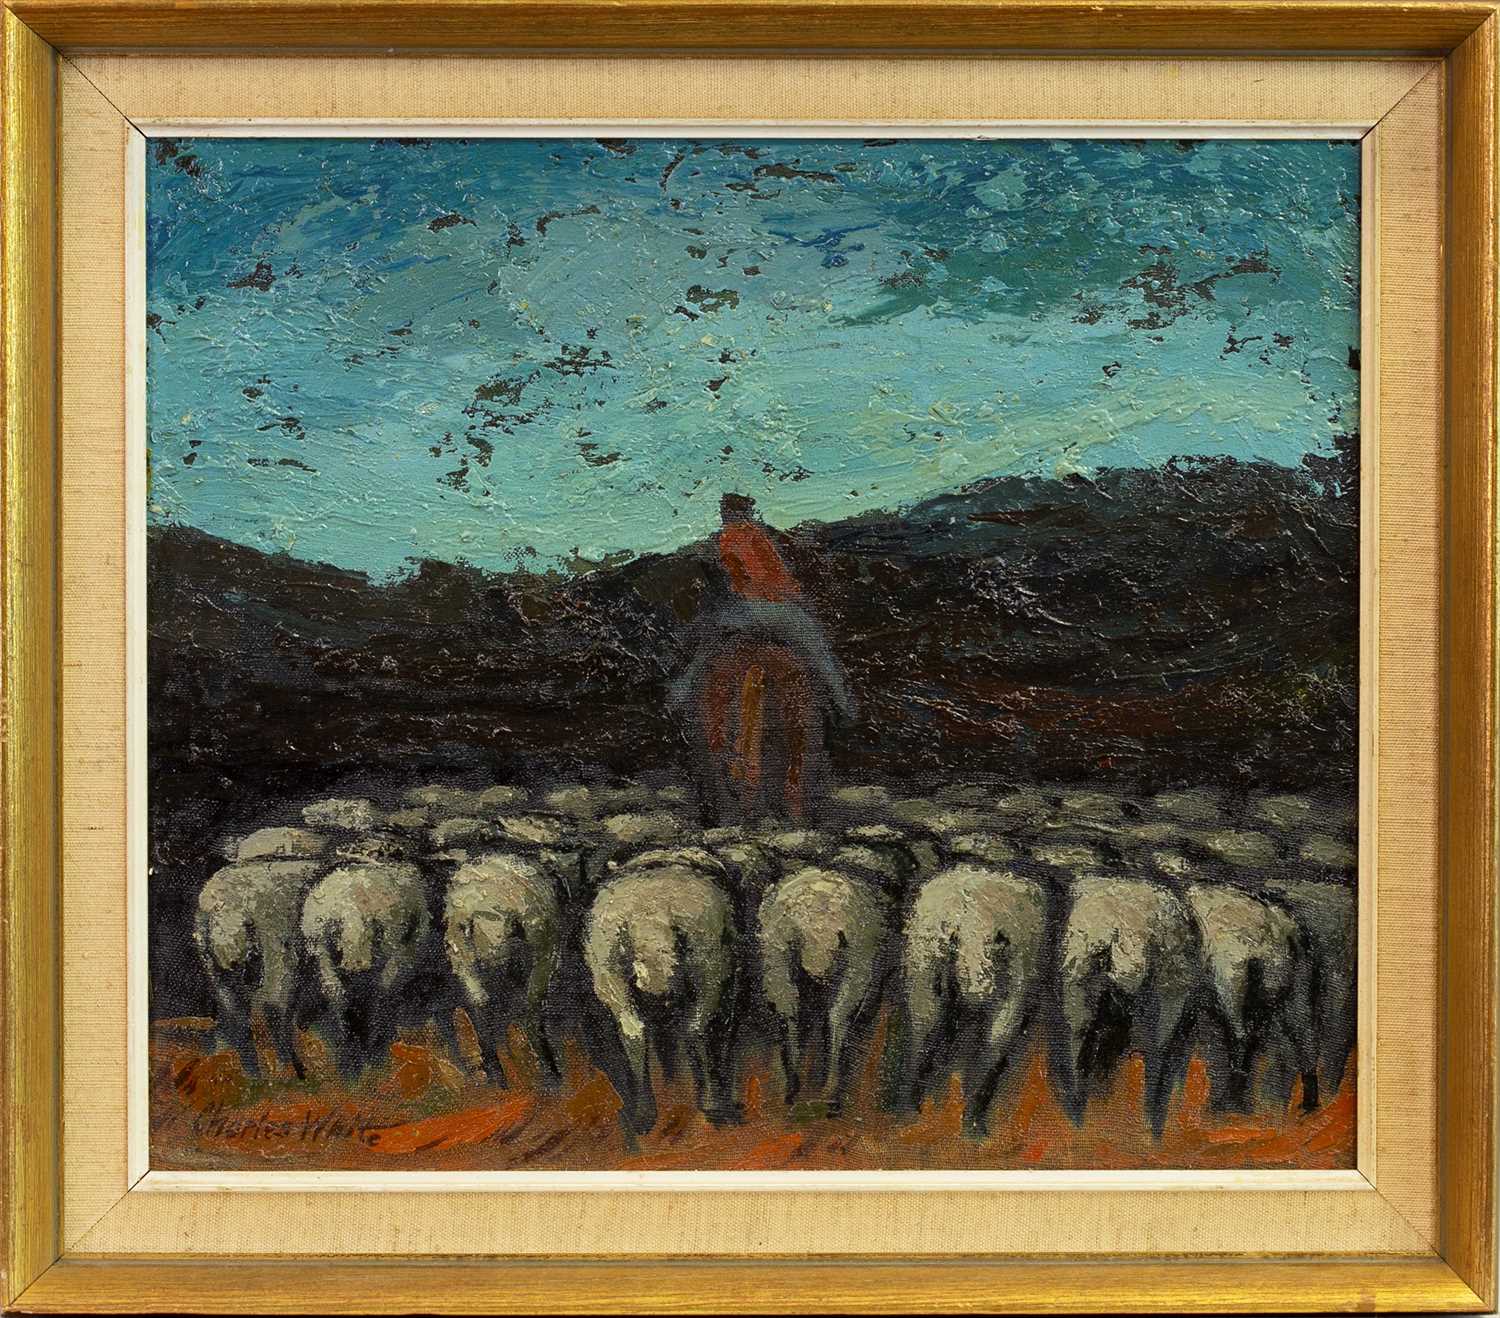 Lot 443 - SHEPHERD WITH HIS FLOCK, AN OIL BY CHARLES WHITE